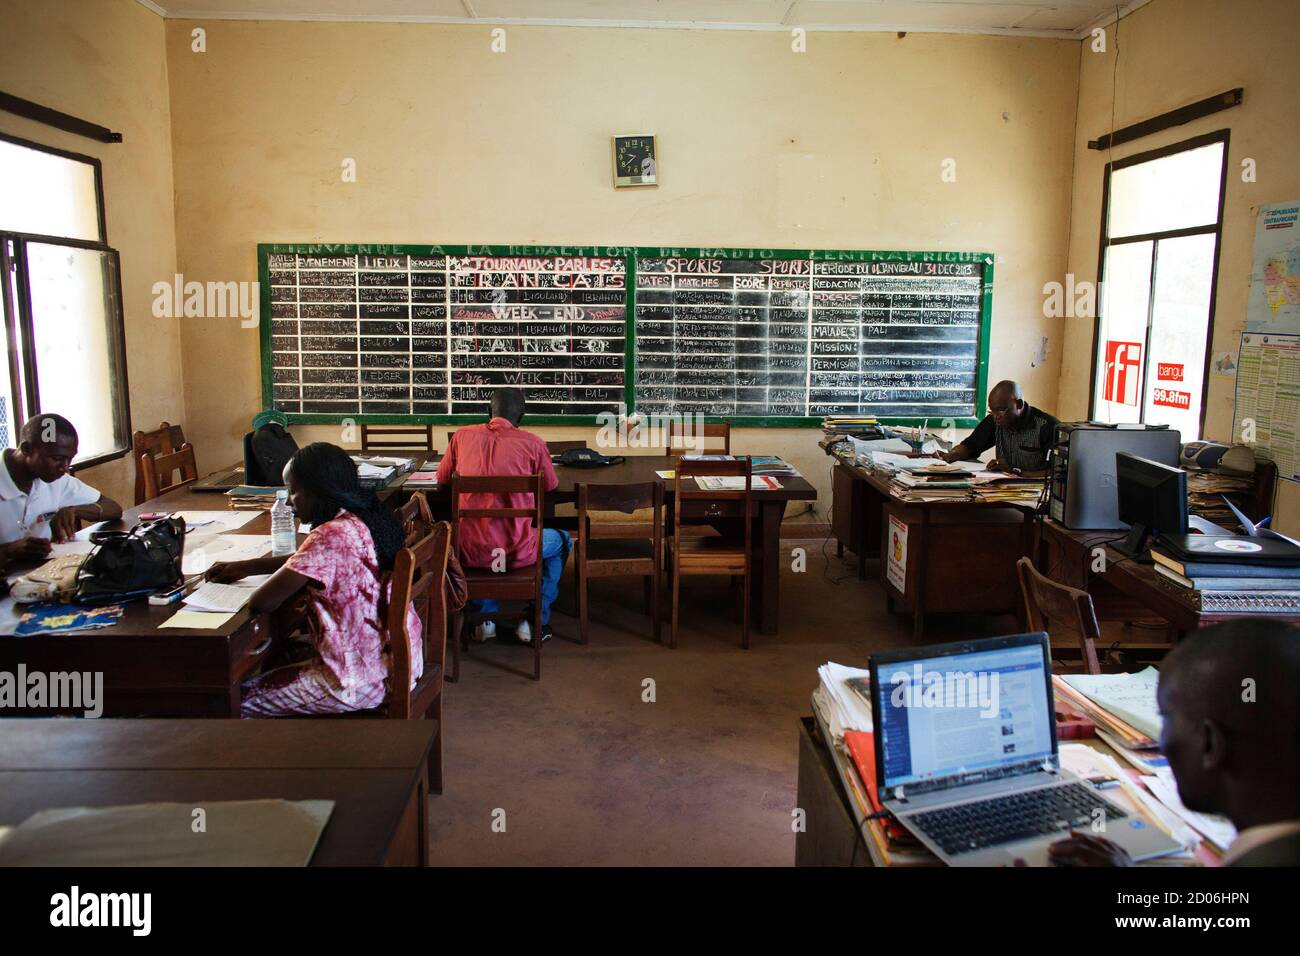 Journalists work in the newsroom of the national radio headquarters in  Bangui, Central African Republic, November 28, 2013. The studio was looted  for its computers and recording equipment during the March 2013